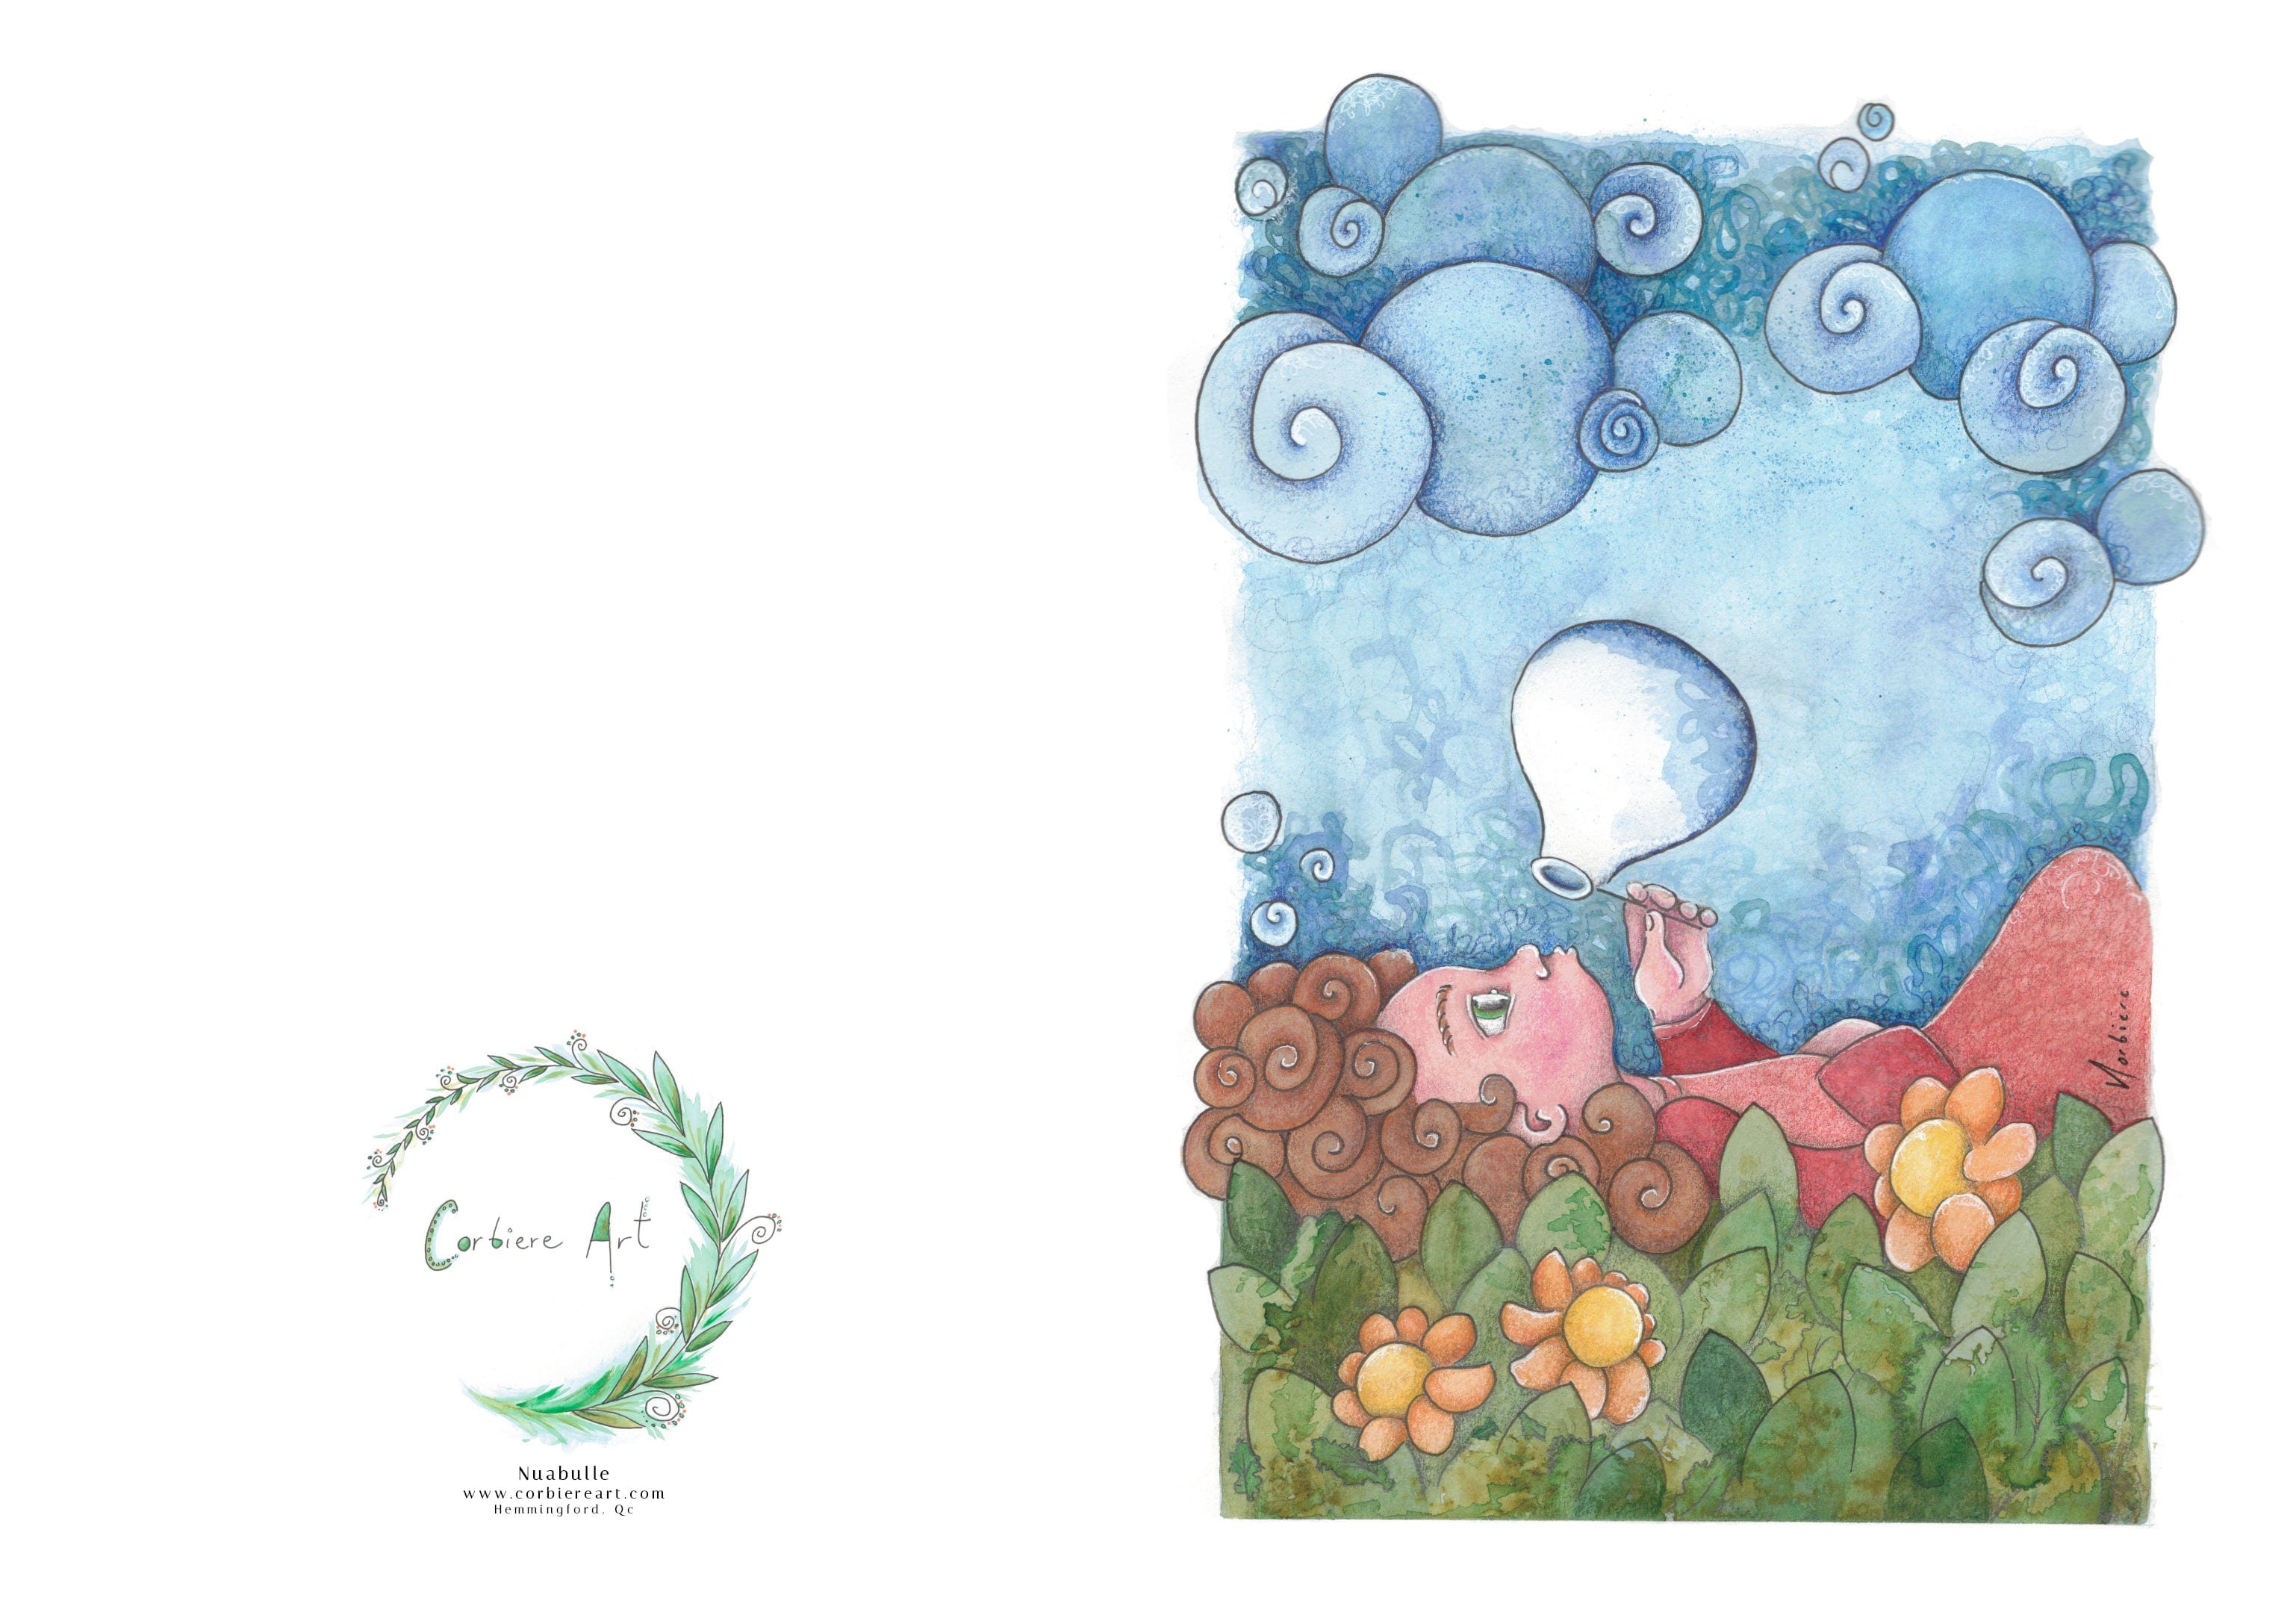 Greeting card - Nuabulle